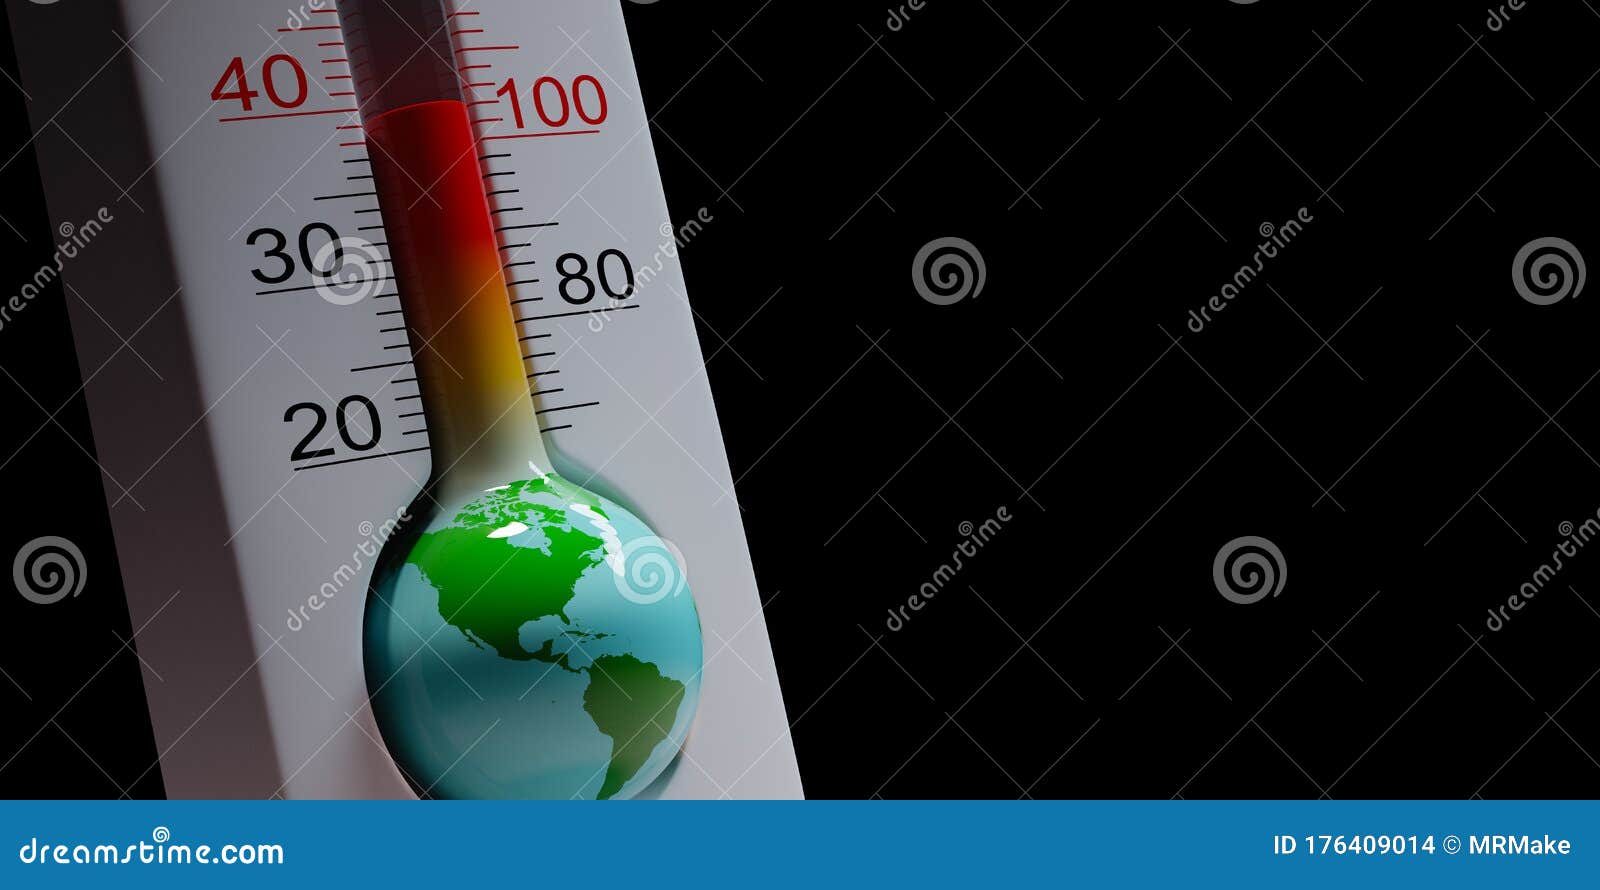 https://thumbs.dreamstime.com/z/earth-thermometer-global-pandemic-concept-shape-close-up-black-background-copy-space-d-illustration-world-176409014.jpg